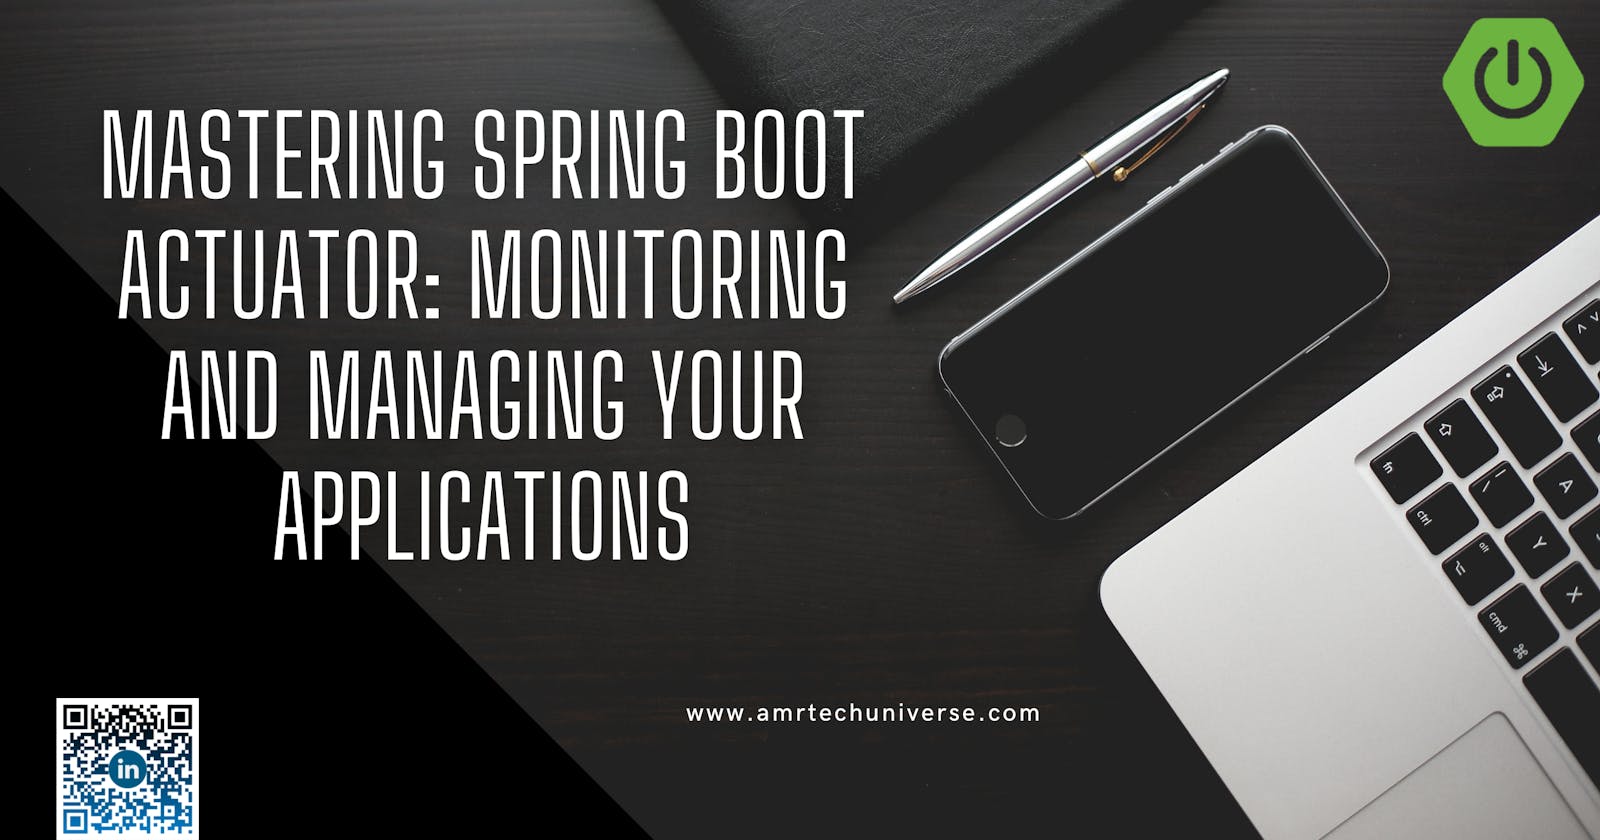 Mastering Spring Boot Actuator: Monitoring and Managing Your Applications